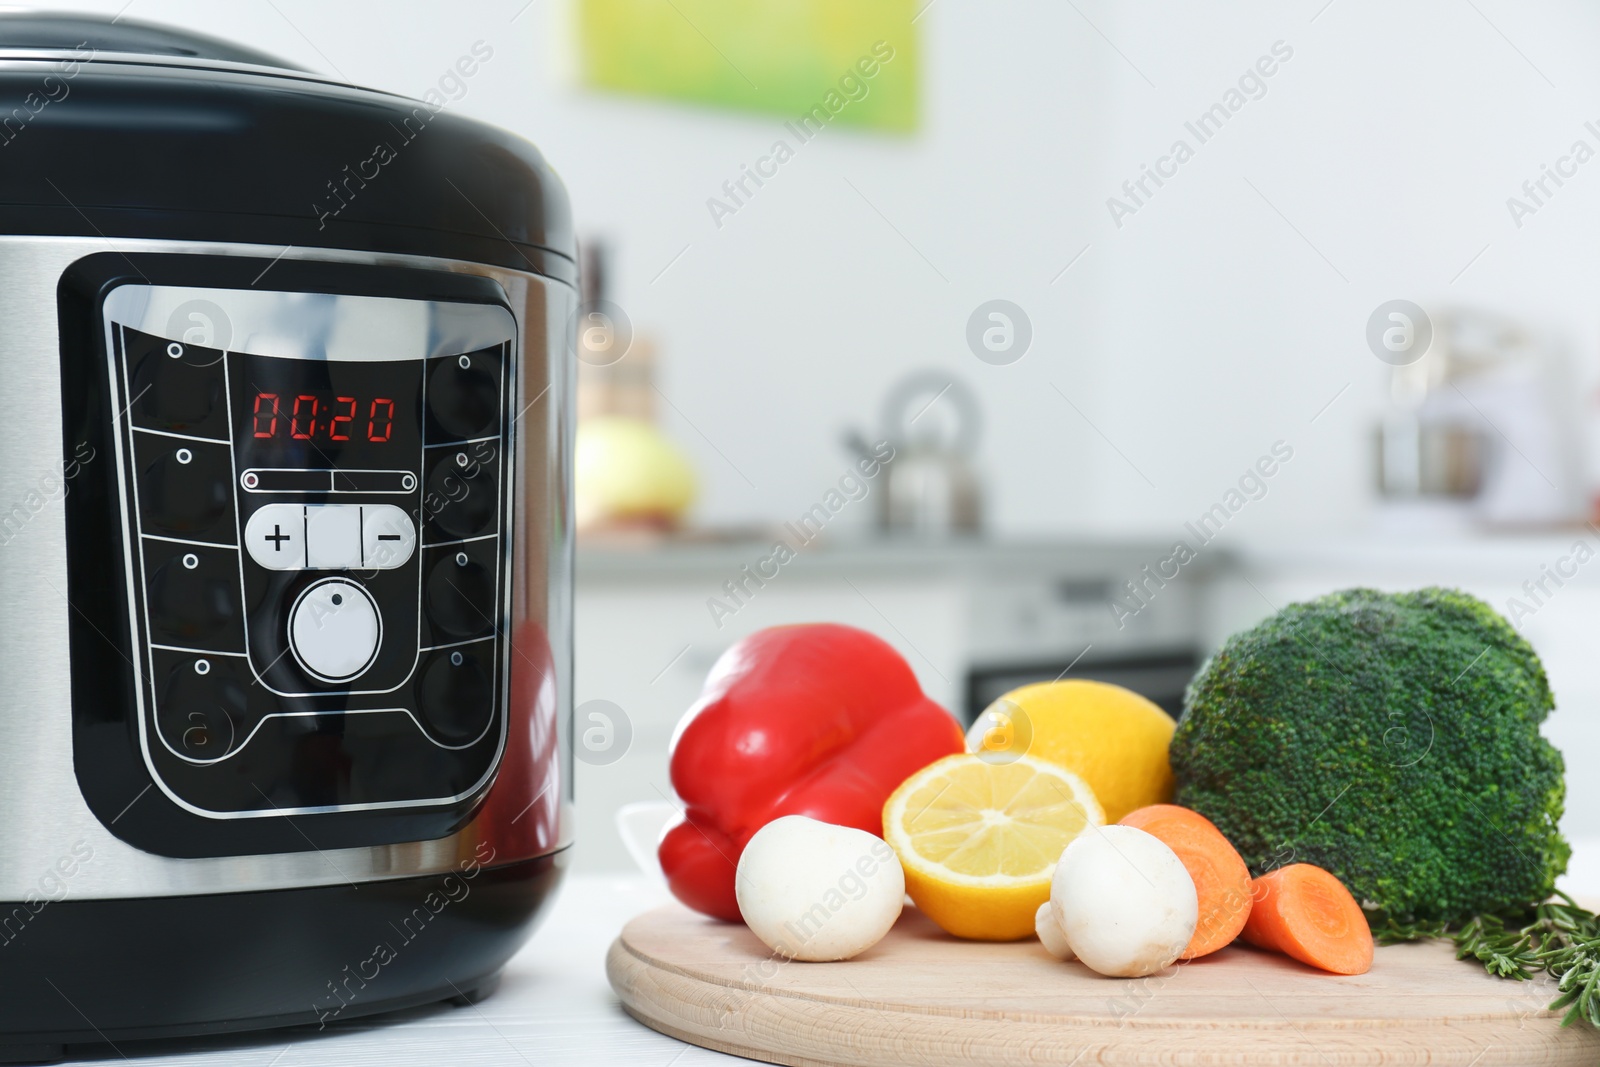 Photo of Modern multi cooker and products on kitchen table